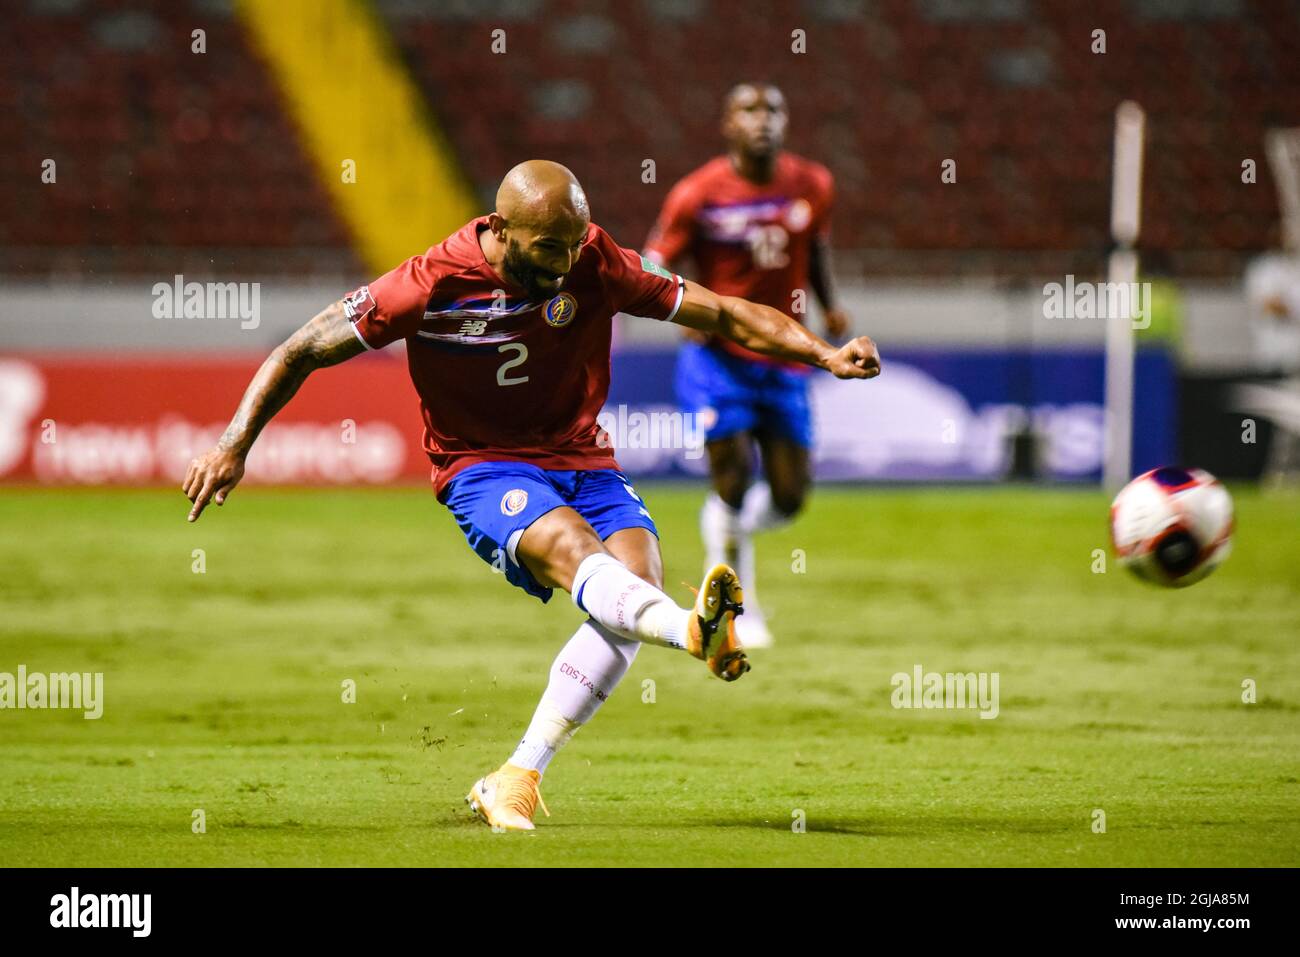 SAN JOSE, Costa Rica:  Ricardo Blanco of Costa Rica during the 1-1 draw game between Costa Rica and Jamaica in the Concacaf FIFA World Cup Qualifiers Stock Photo